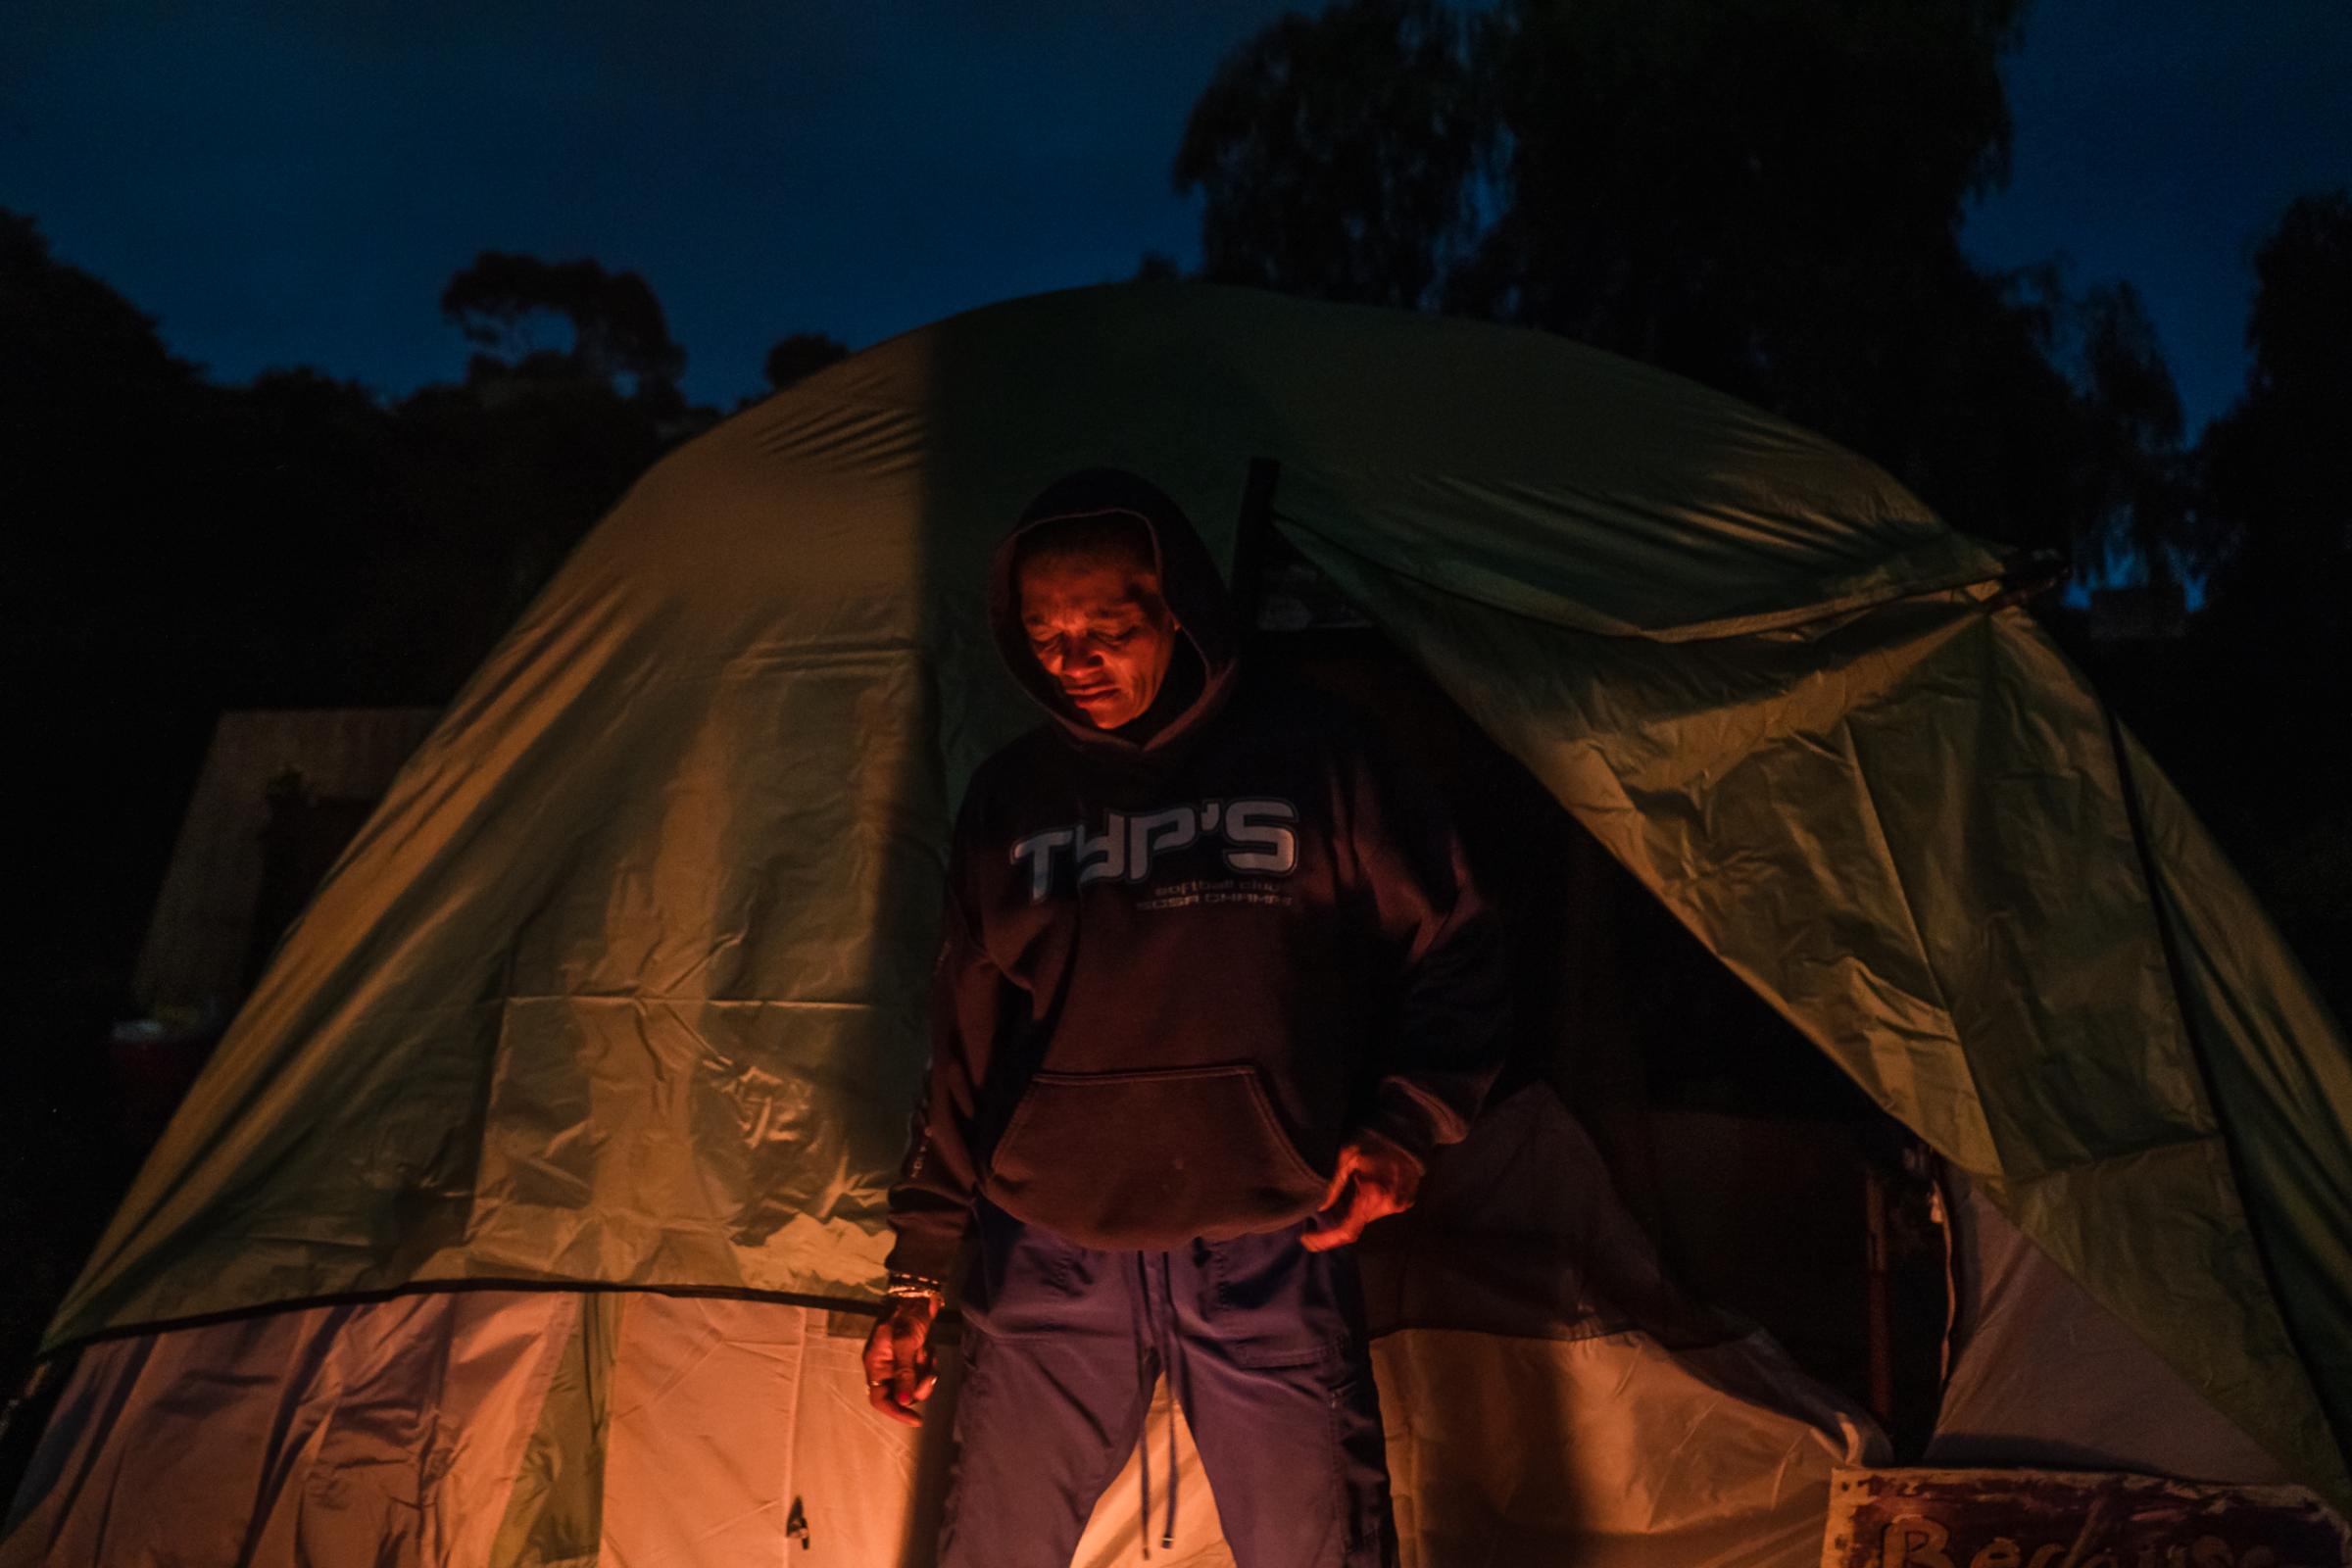  The Faces of Homelessness in San Diego